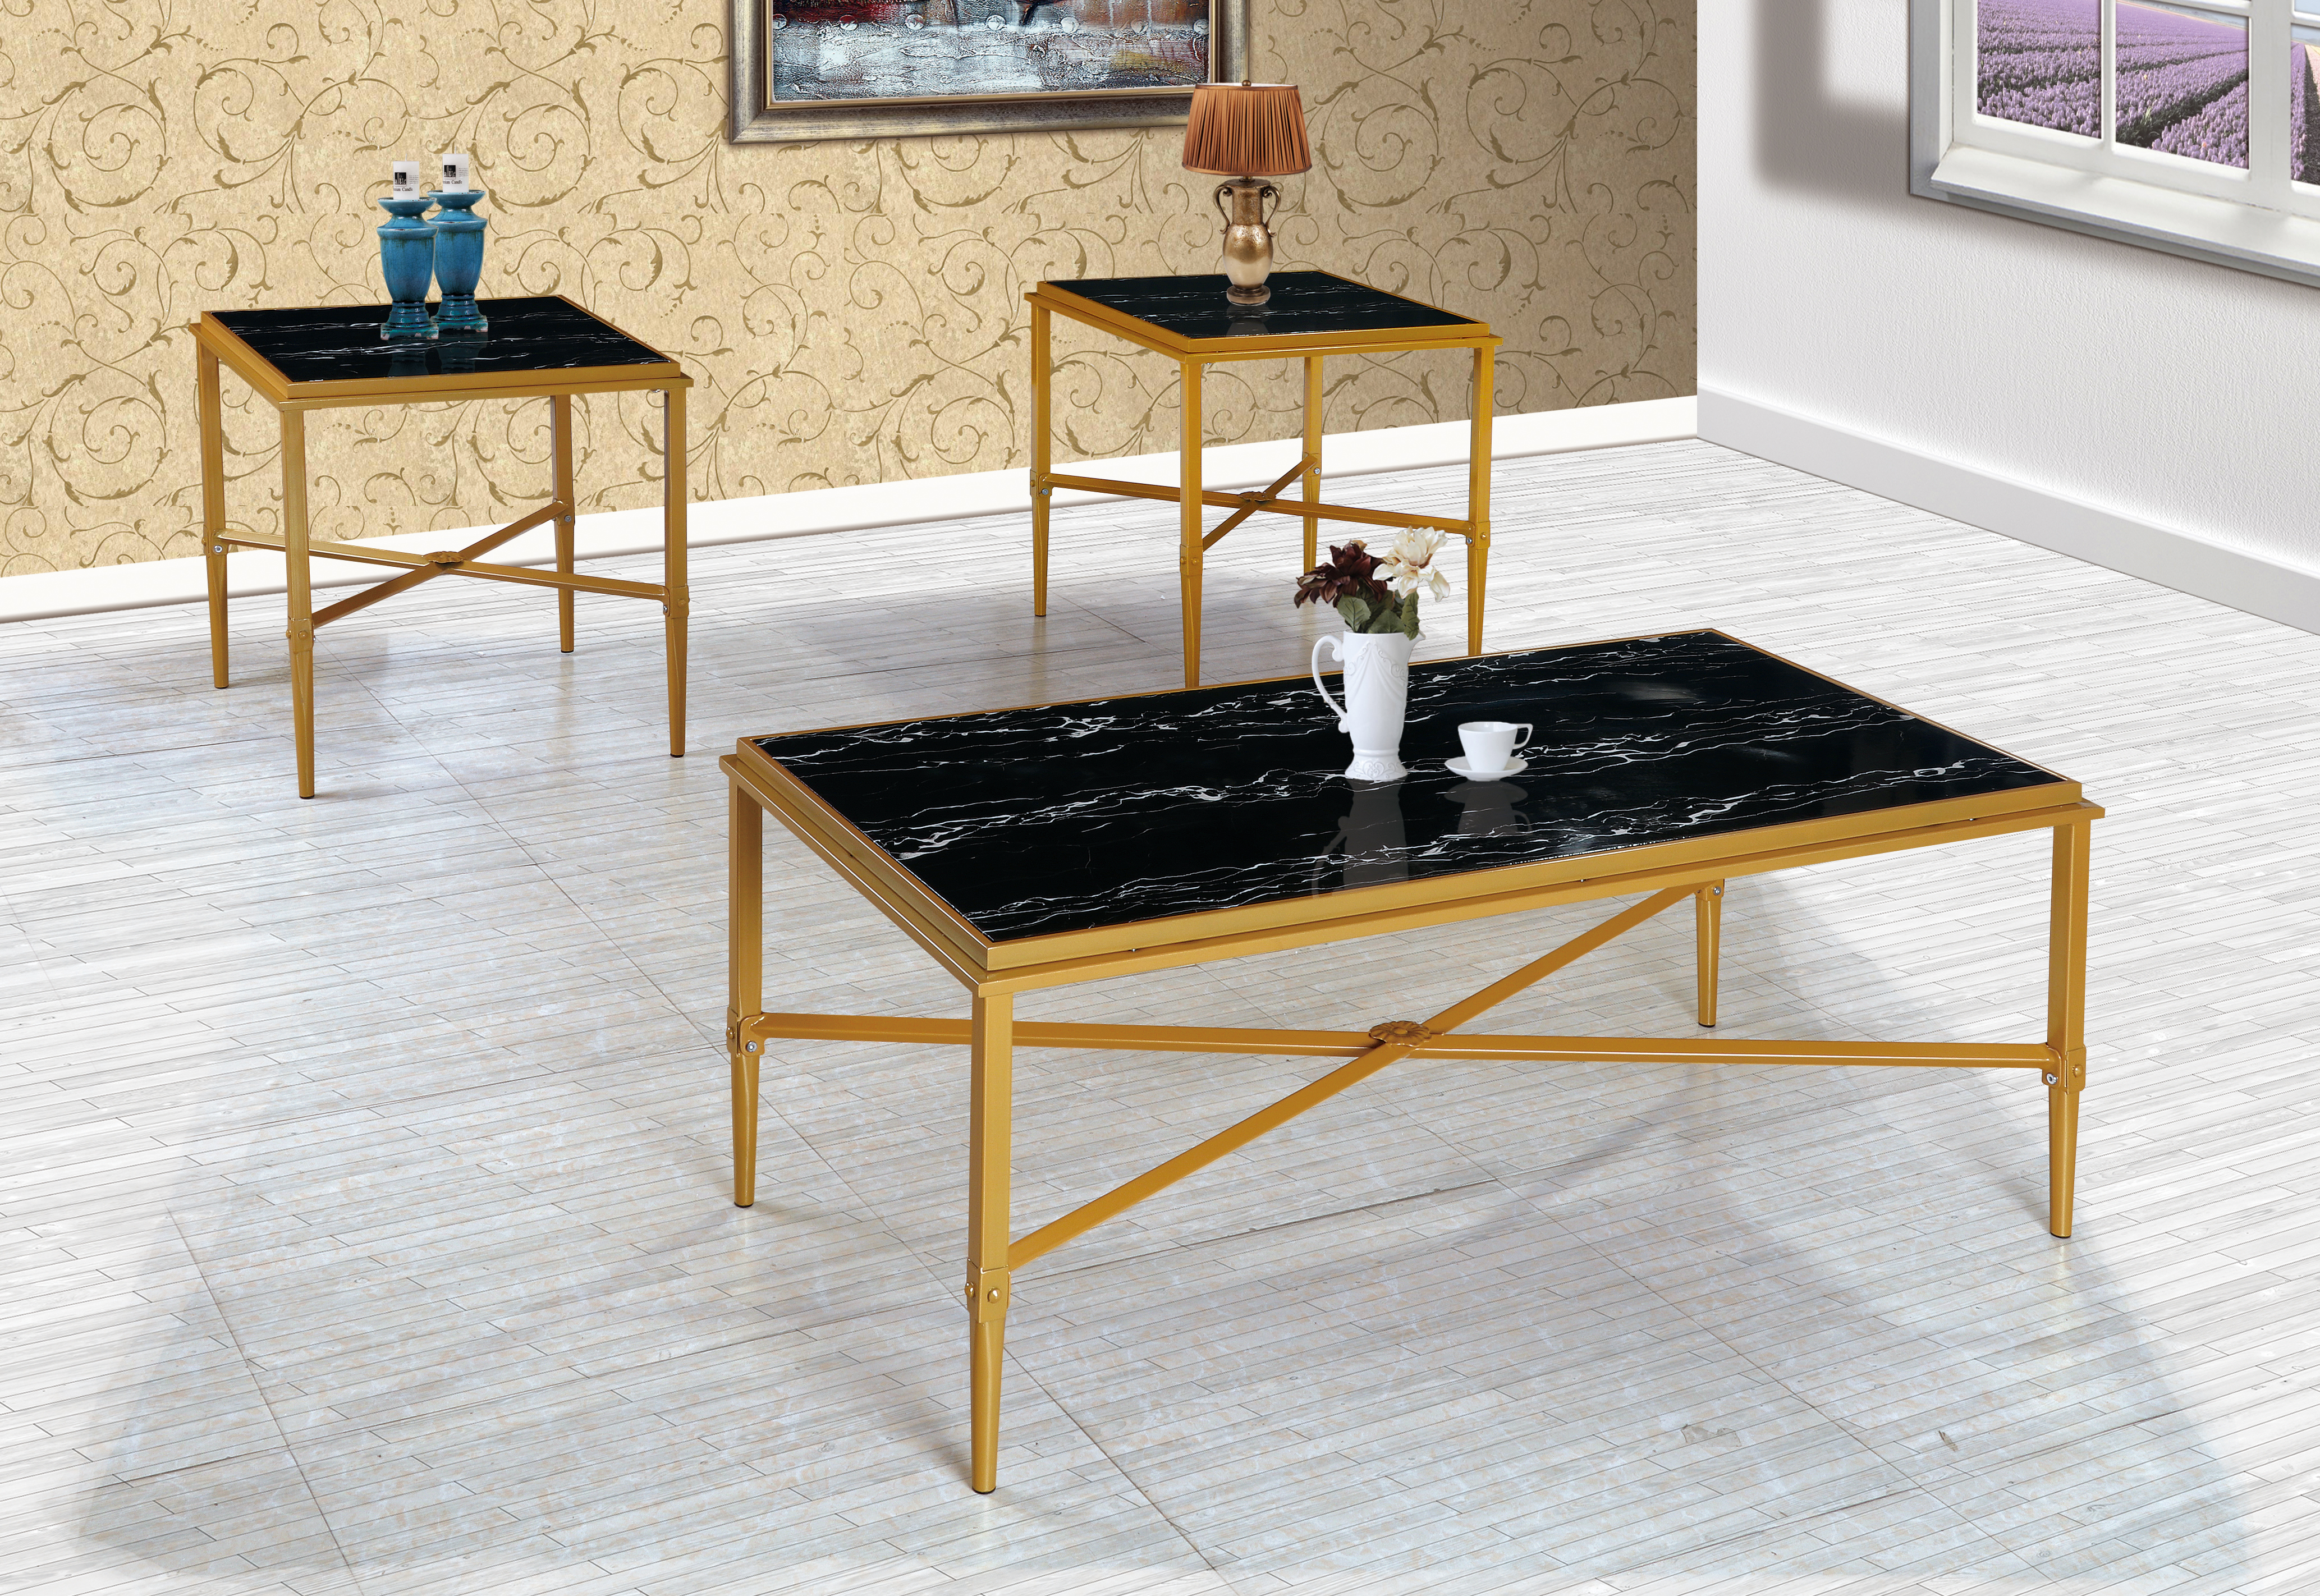 GS-CT883 3PC COFFEE TABLE SET Featured Image